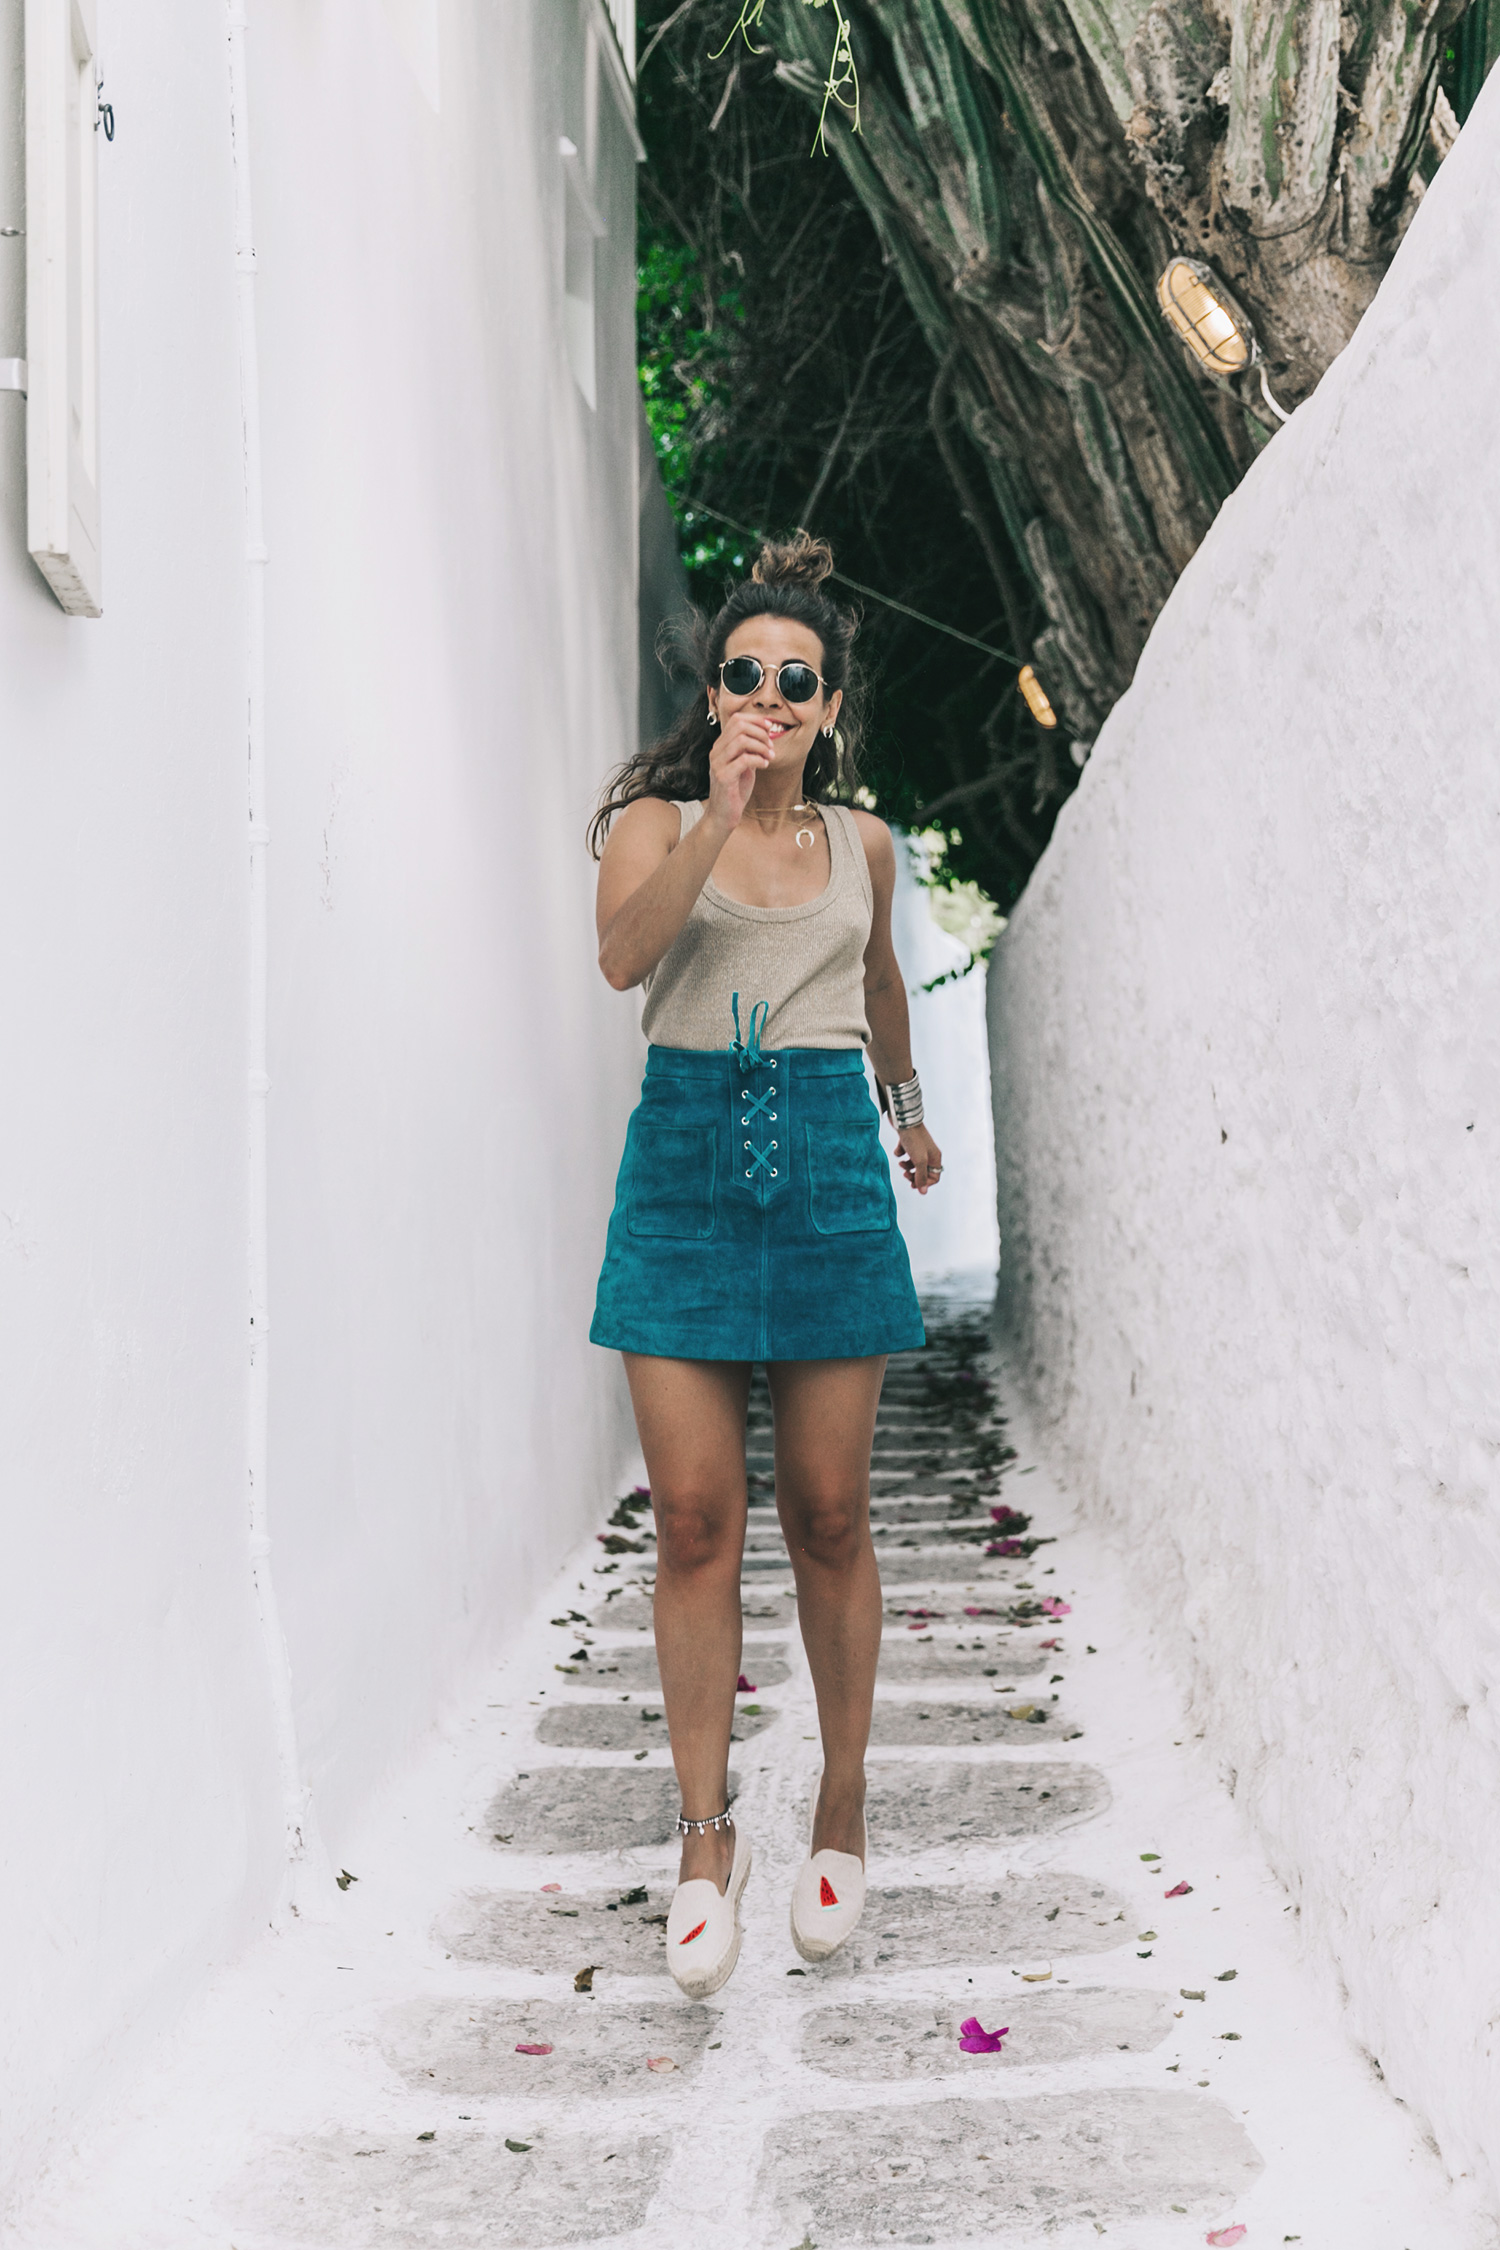 Gold_Top-Metallic_Trend-Suede_Skirt-Turquoise_Skirt-Soludos_Espadrilles-Soludos_Escapes-Mykonos-Greece-Collage_Vintage-Street_Style-54